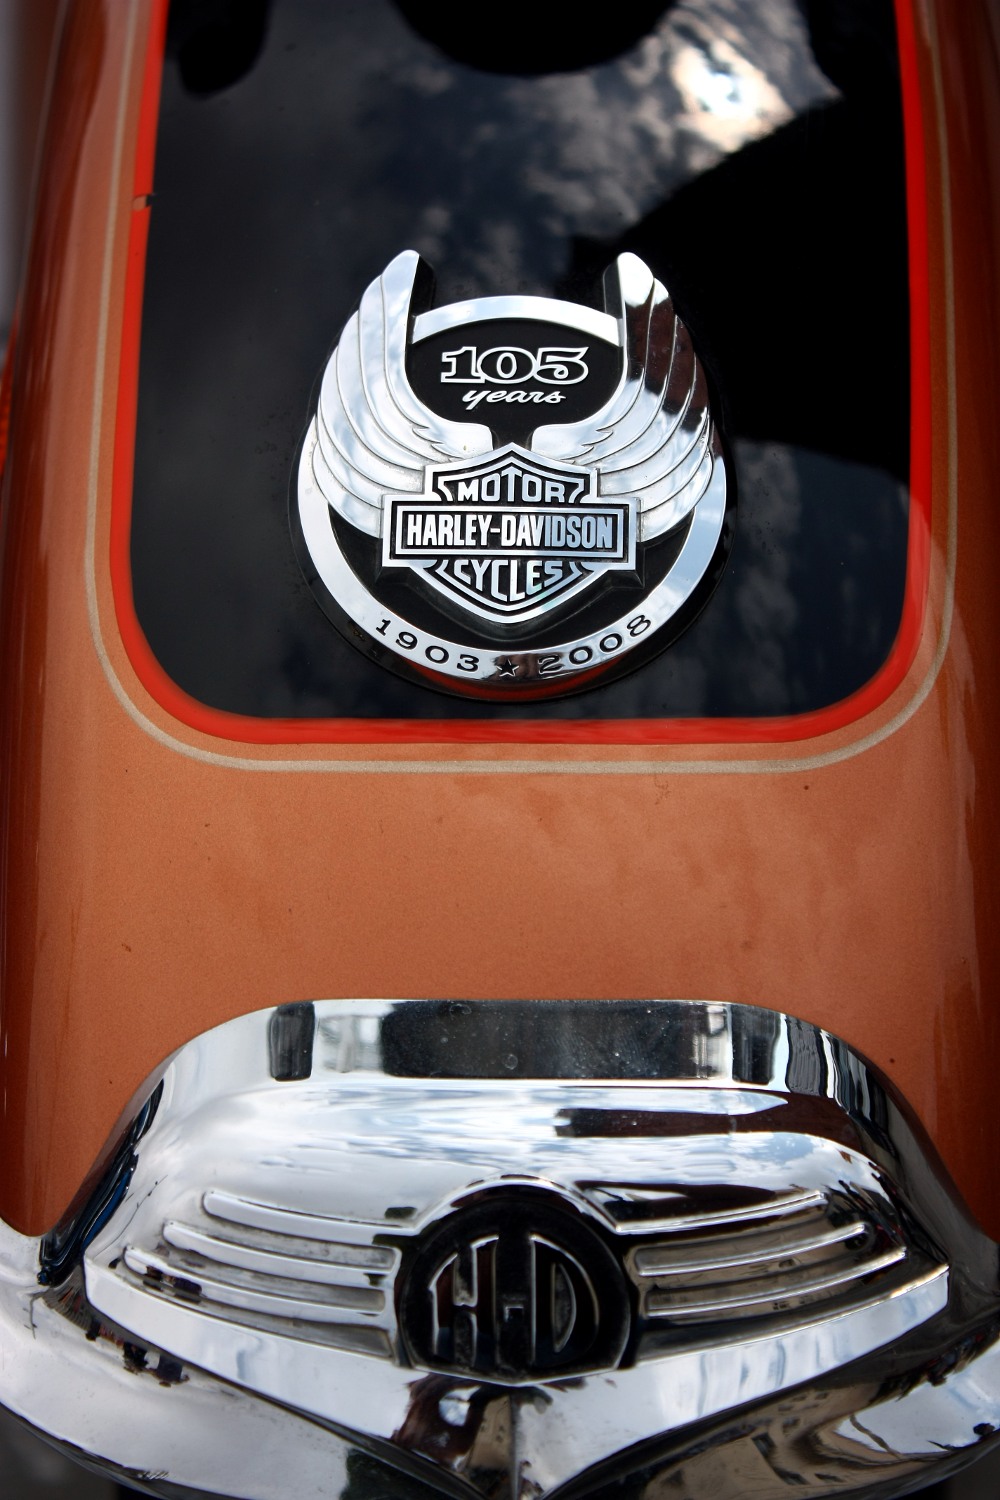 a brown and orange vehicle has an emblem and number on the side